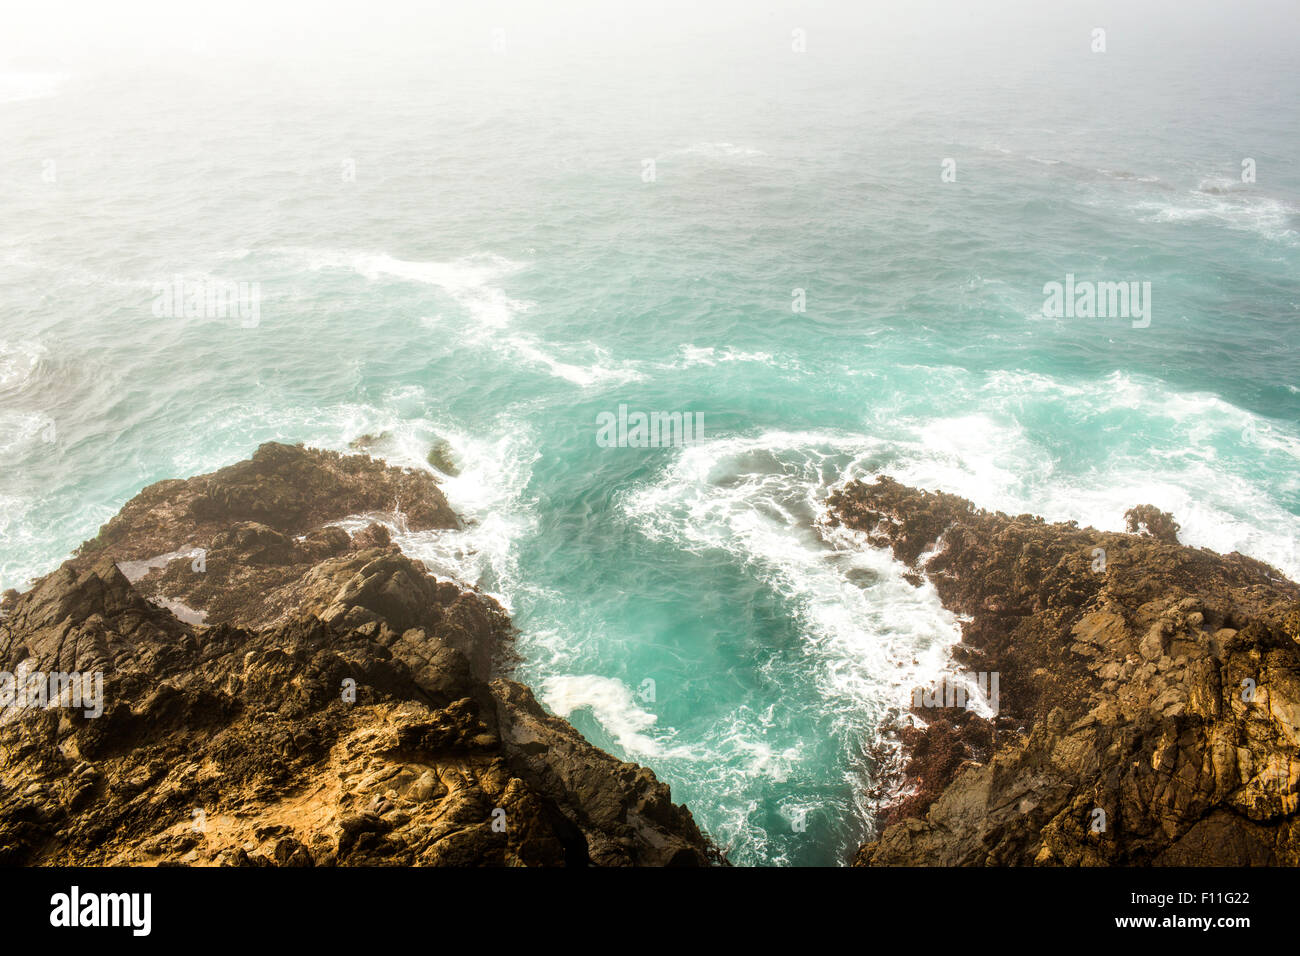 High angle view of ocean waves crashing on cliffs Stock Photo